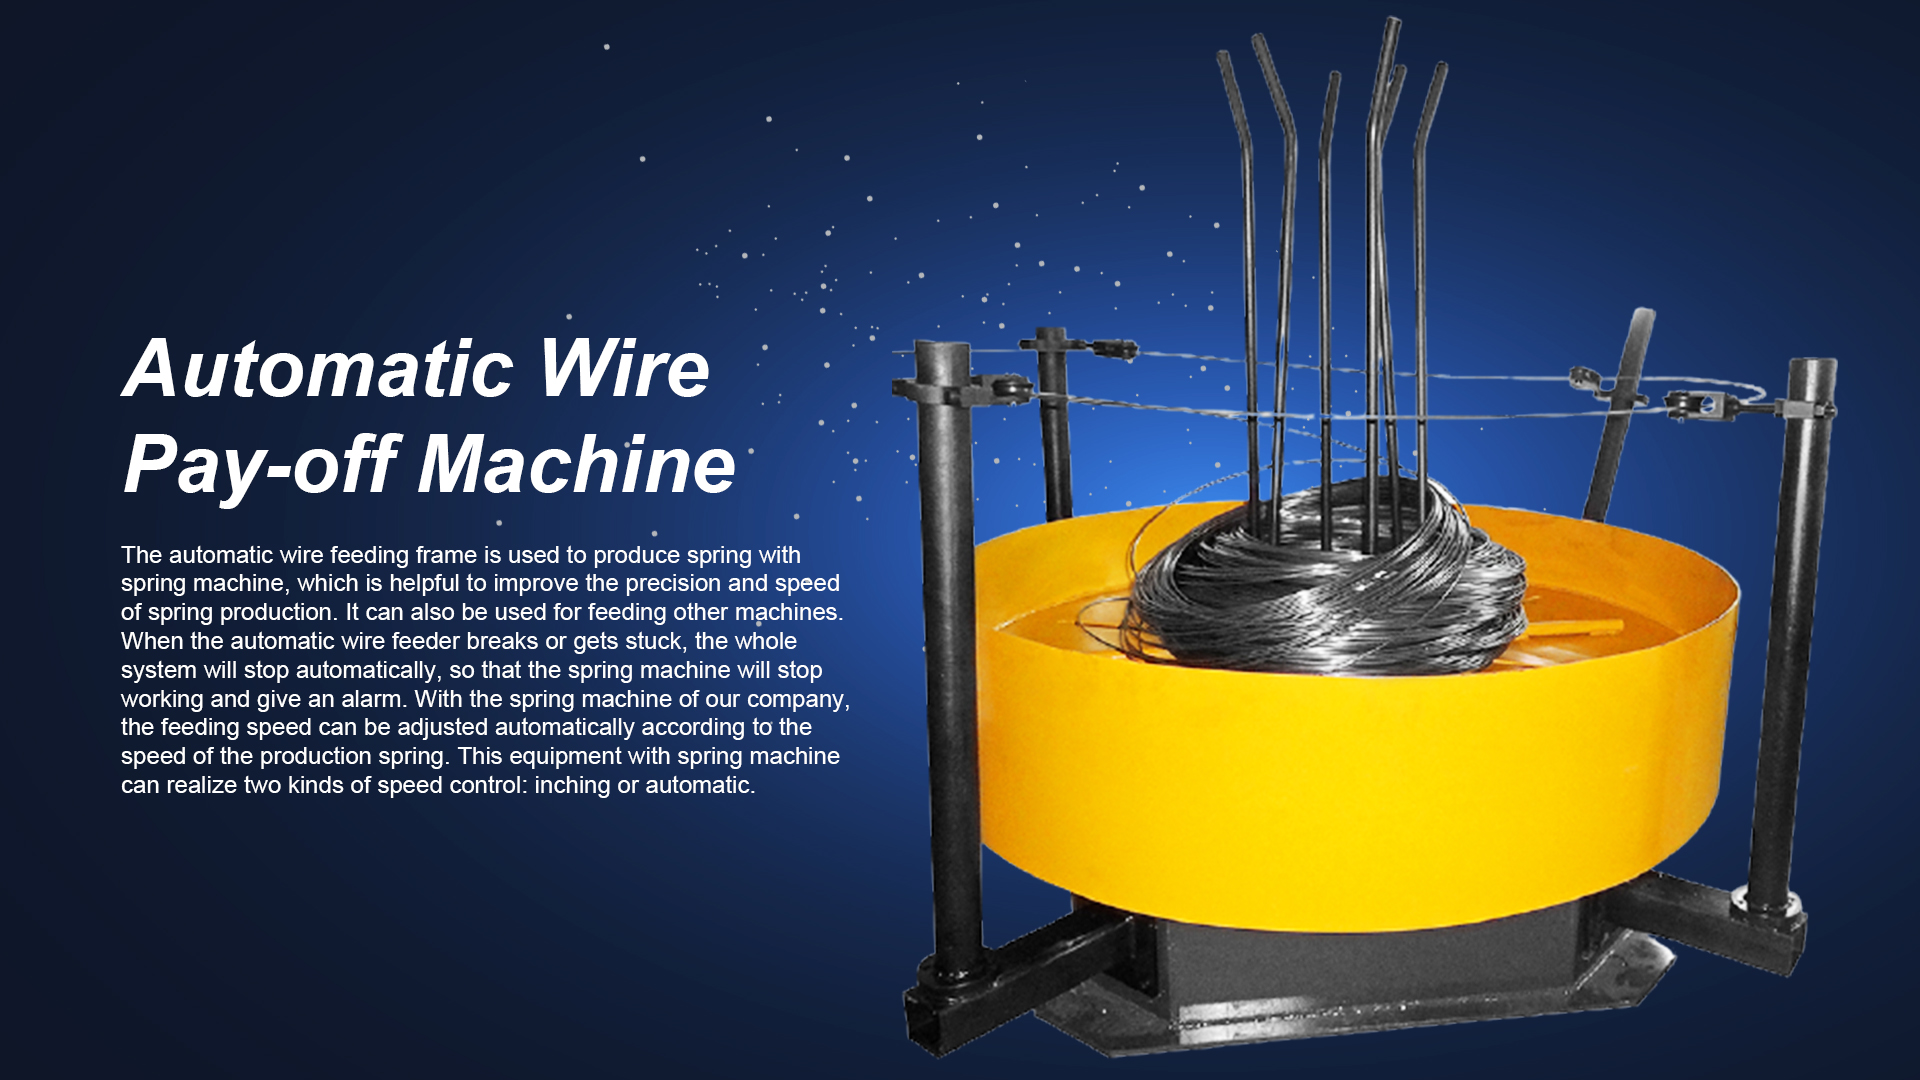 Automatic Wire Pay-off Machine